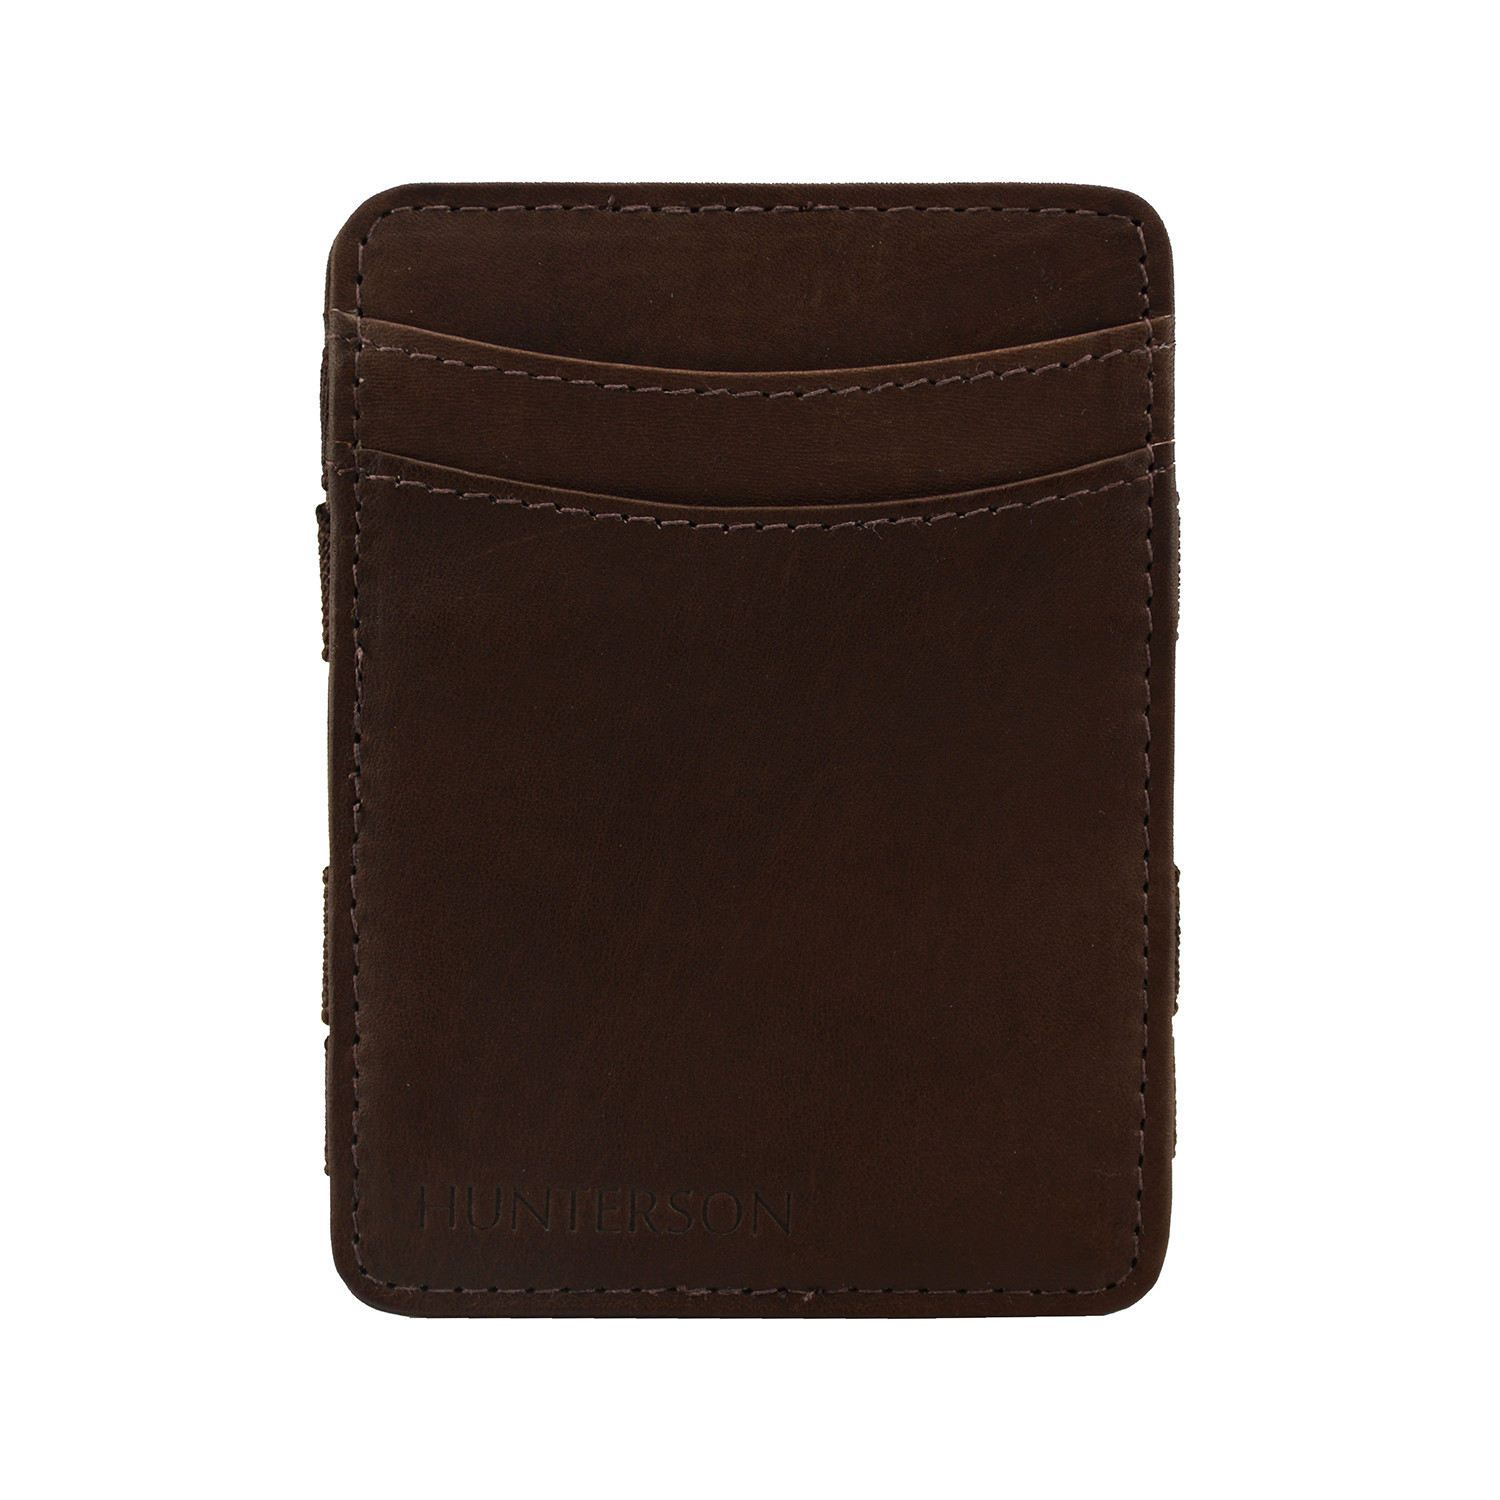 Hunterson Leather Magic Coin Wallet // Brown - Garzini - Touch of Modern